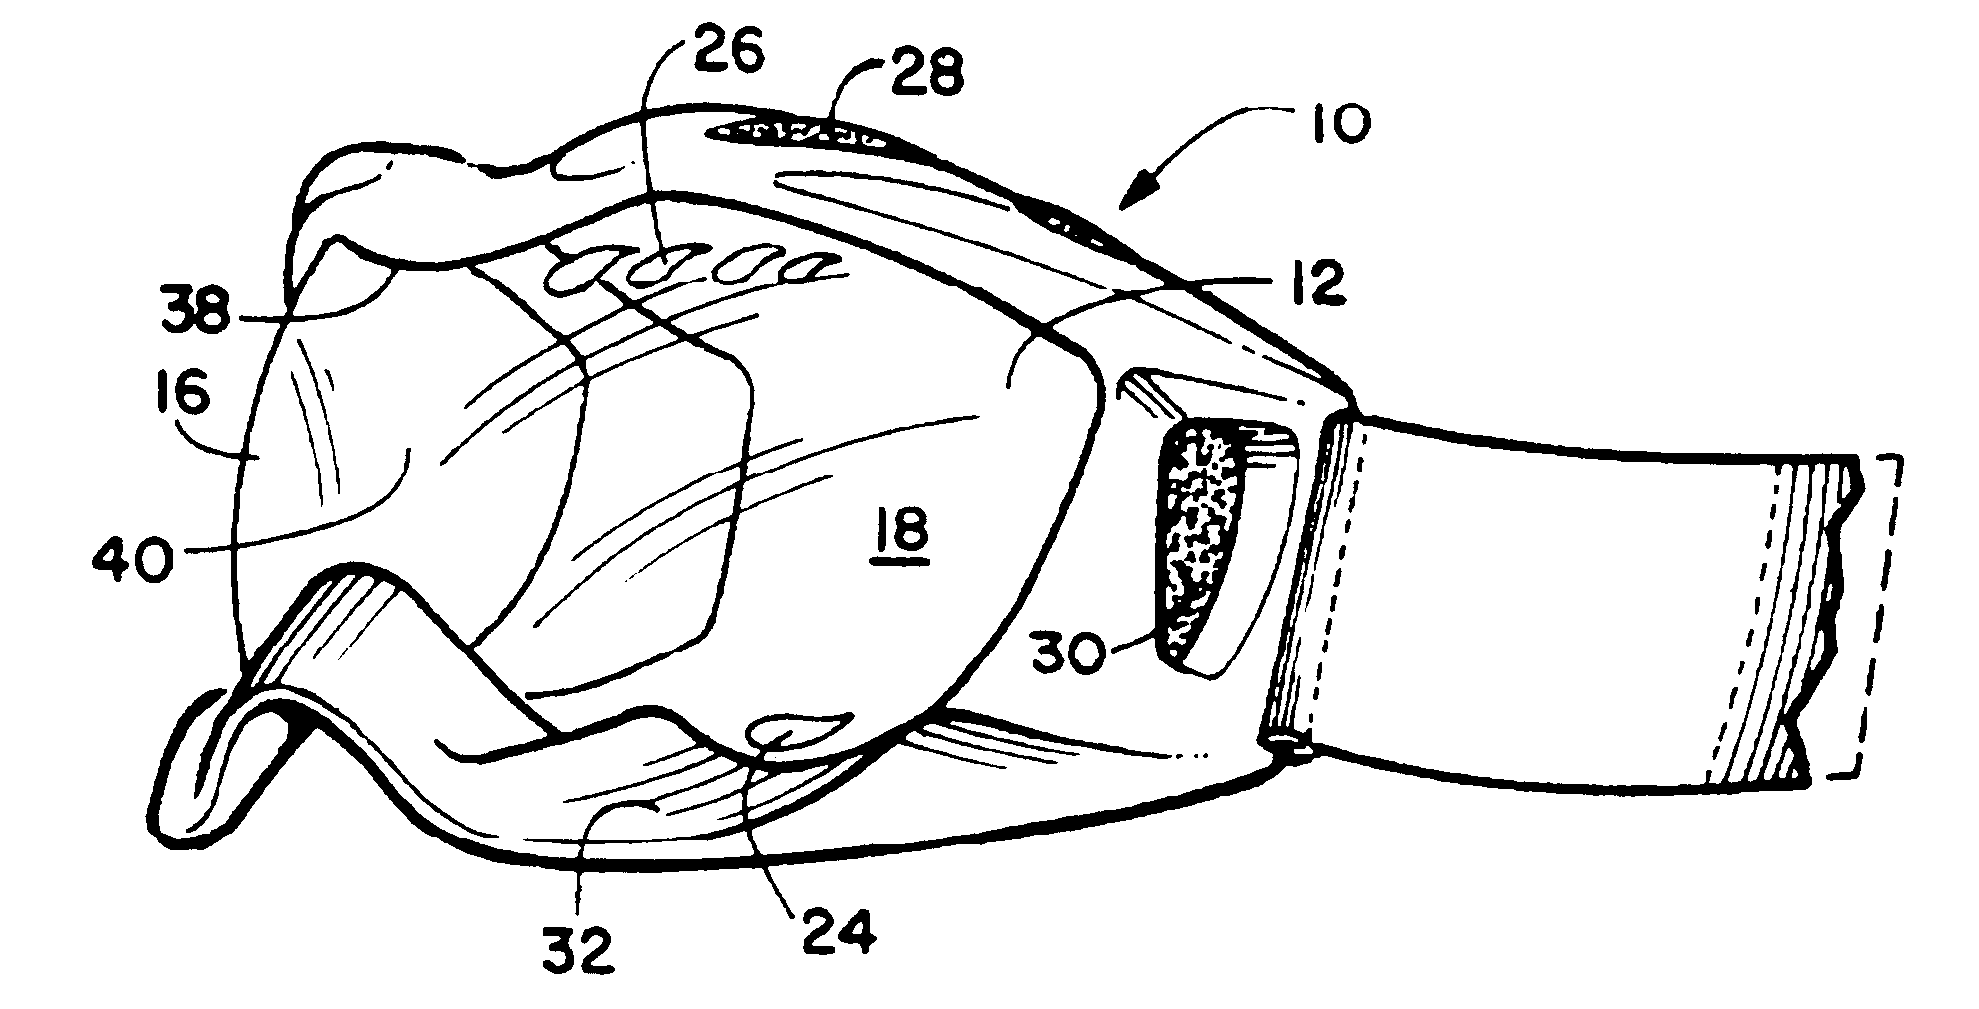 Sport goggle with improved ventilation